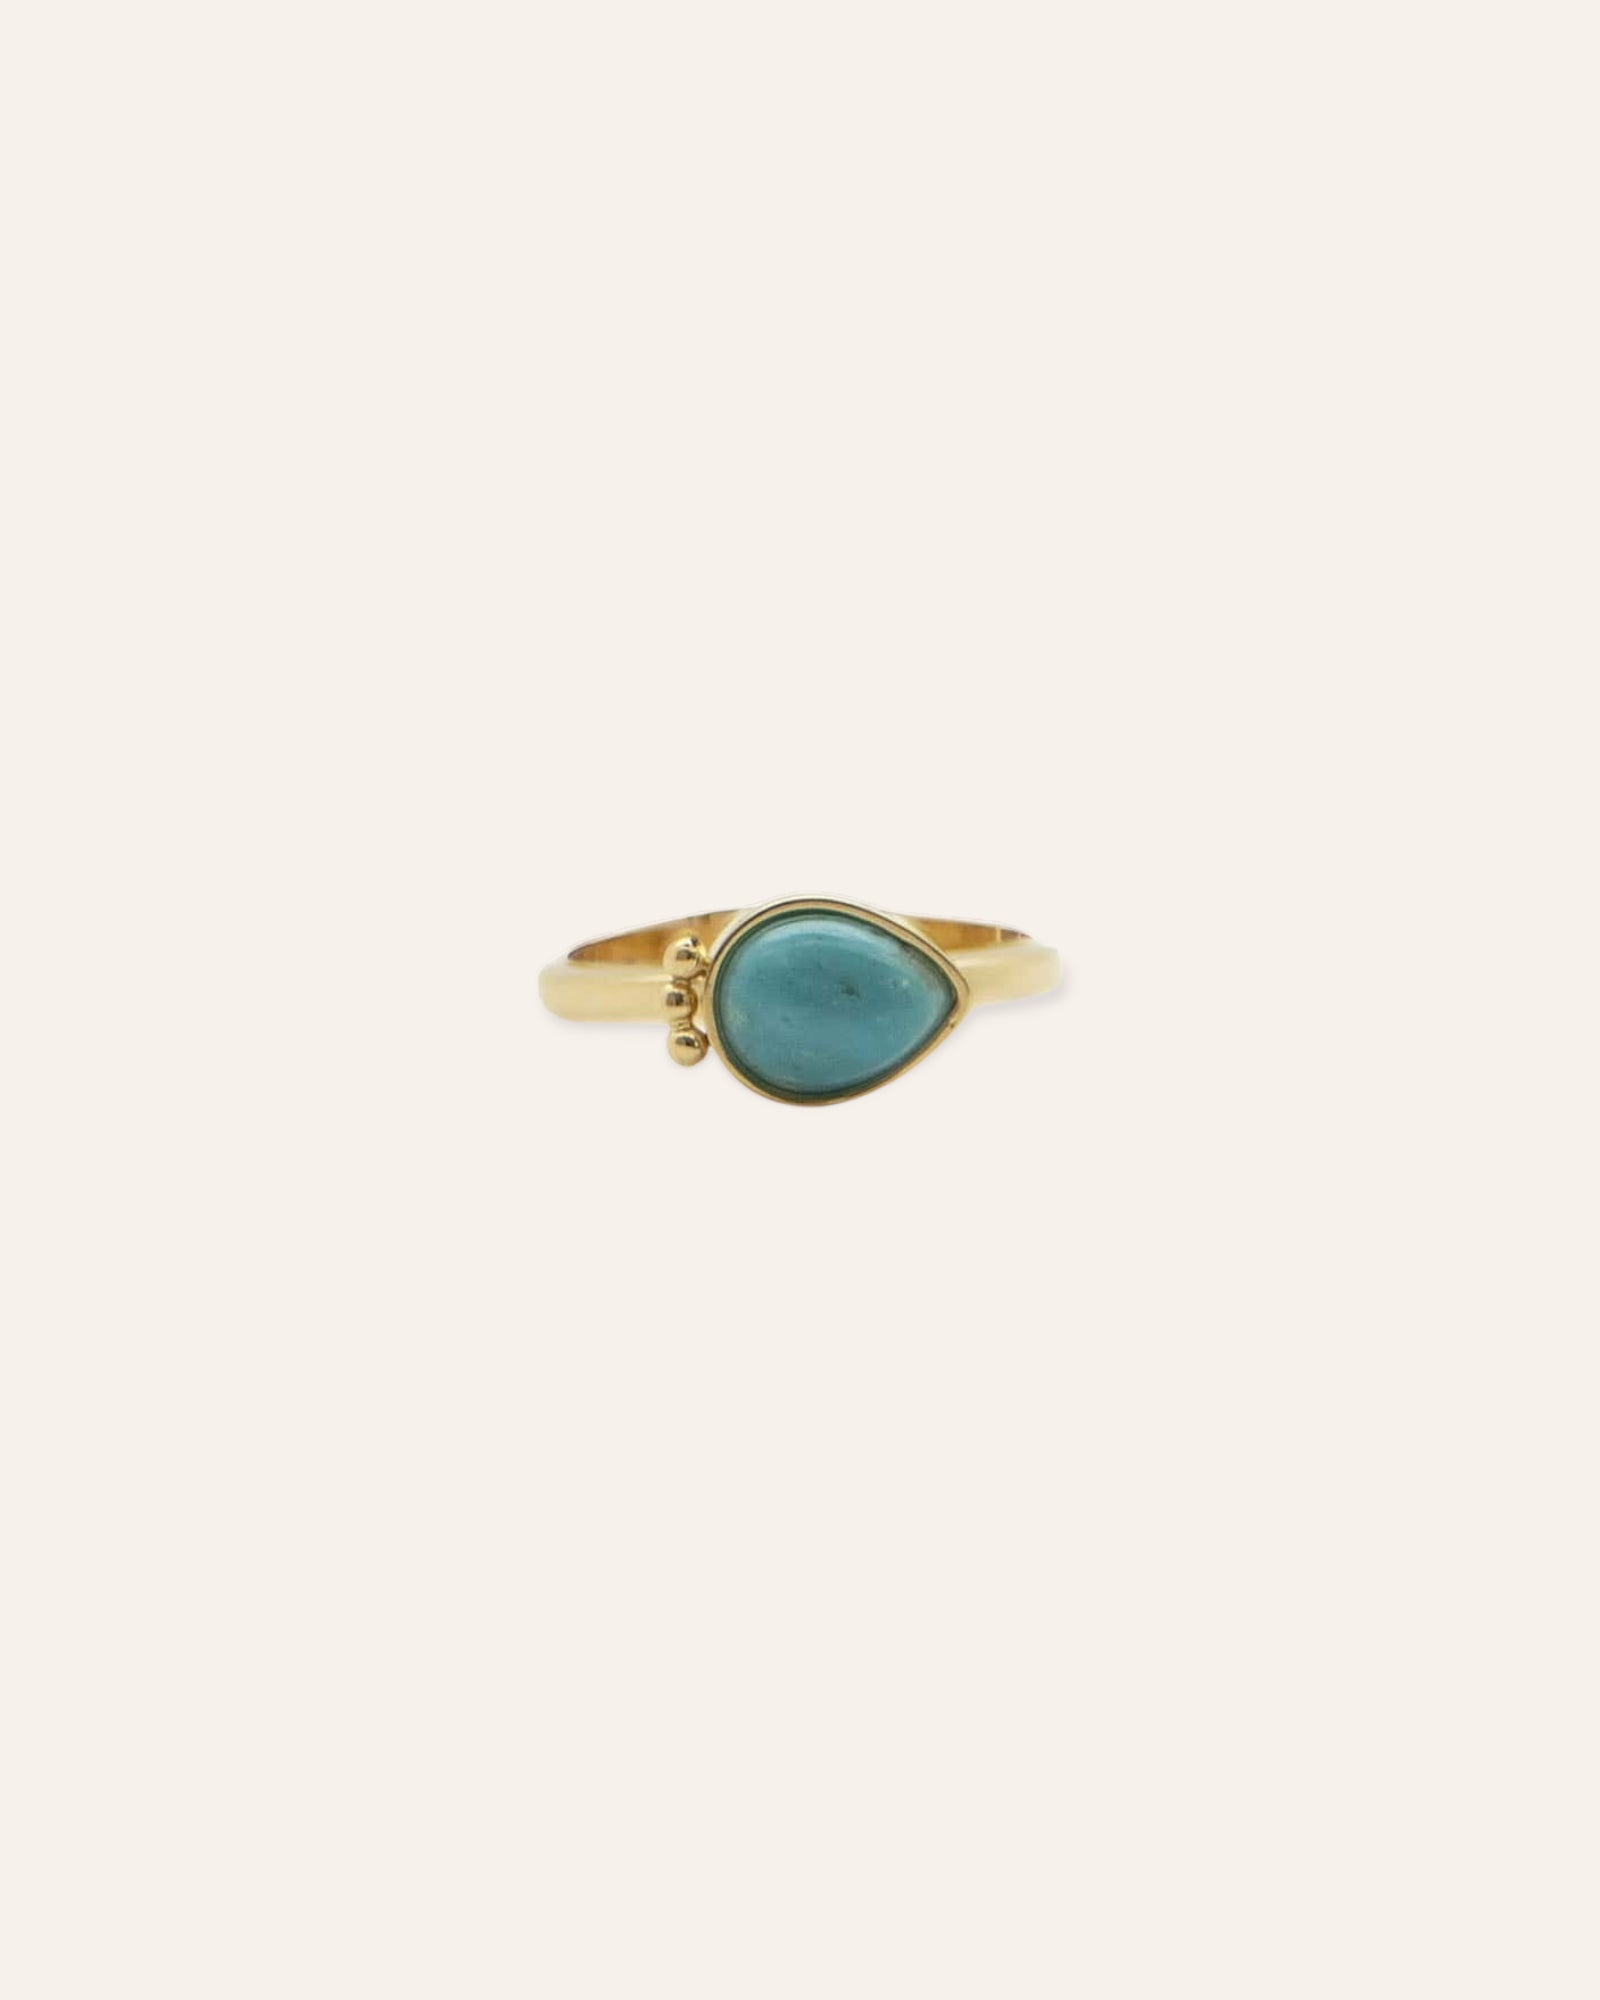 Moapa gold and turquoise ring